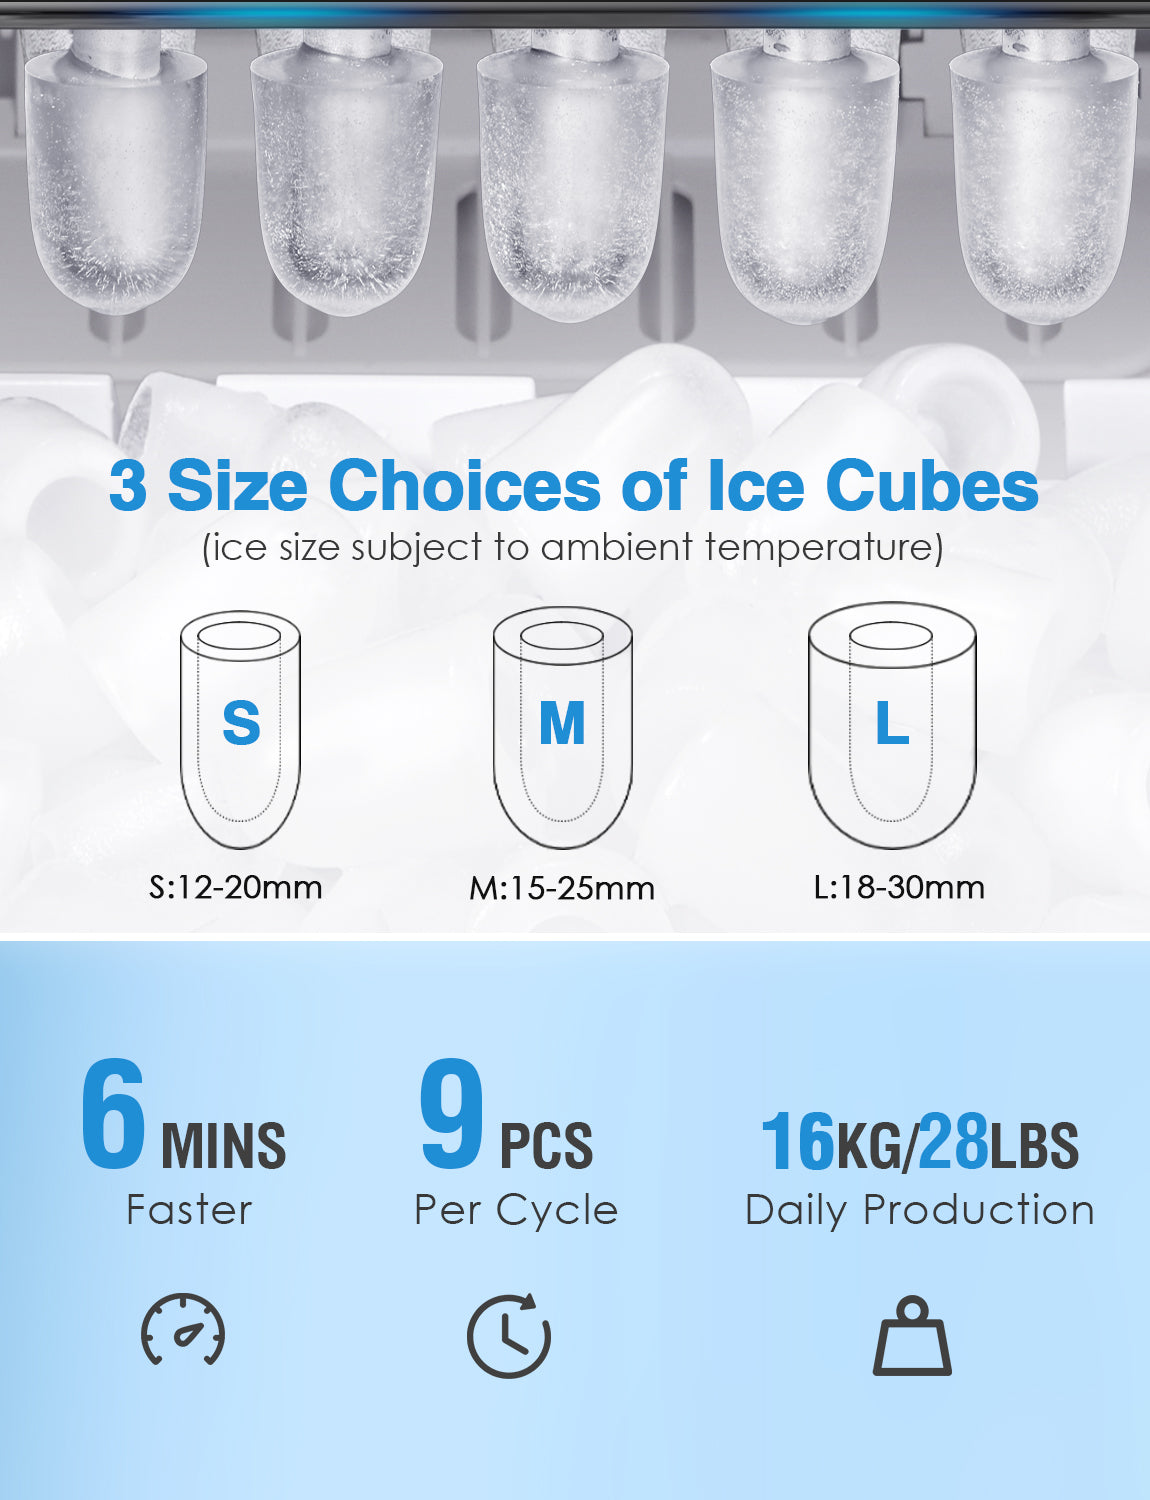 AICOOK Ice Maker Countertop Stainless Steel, 28 lbs. in 24 Hours, 9 Cubes Ready in 6 Minutes, 3 Ice Sizes, 2.4L with LED Display, Self Cleaning Function, Quiet Ice Maker Machine with Timer, Scoop and Basket